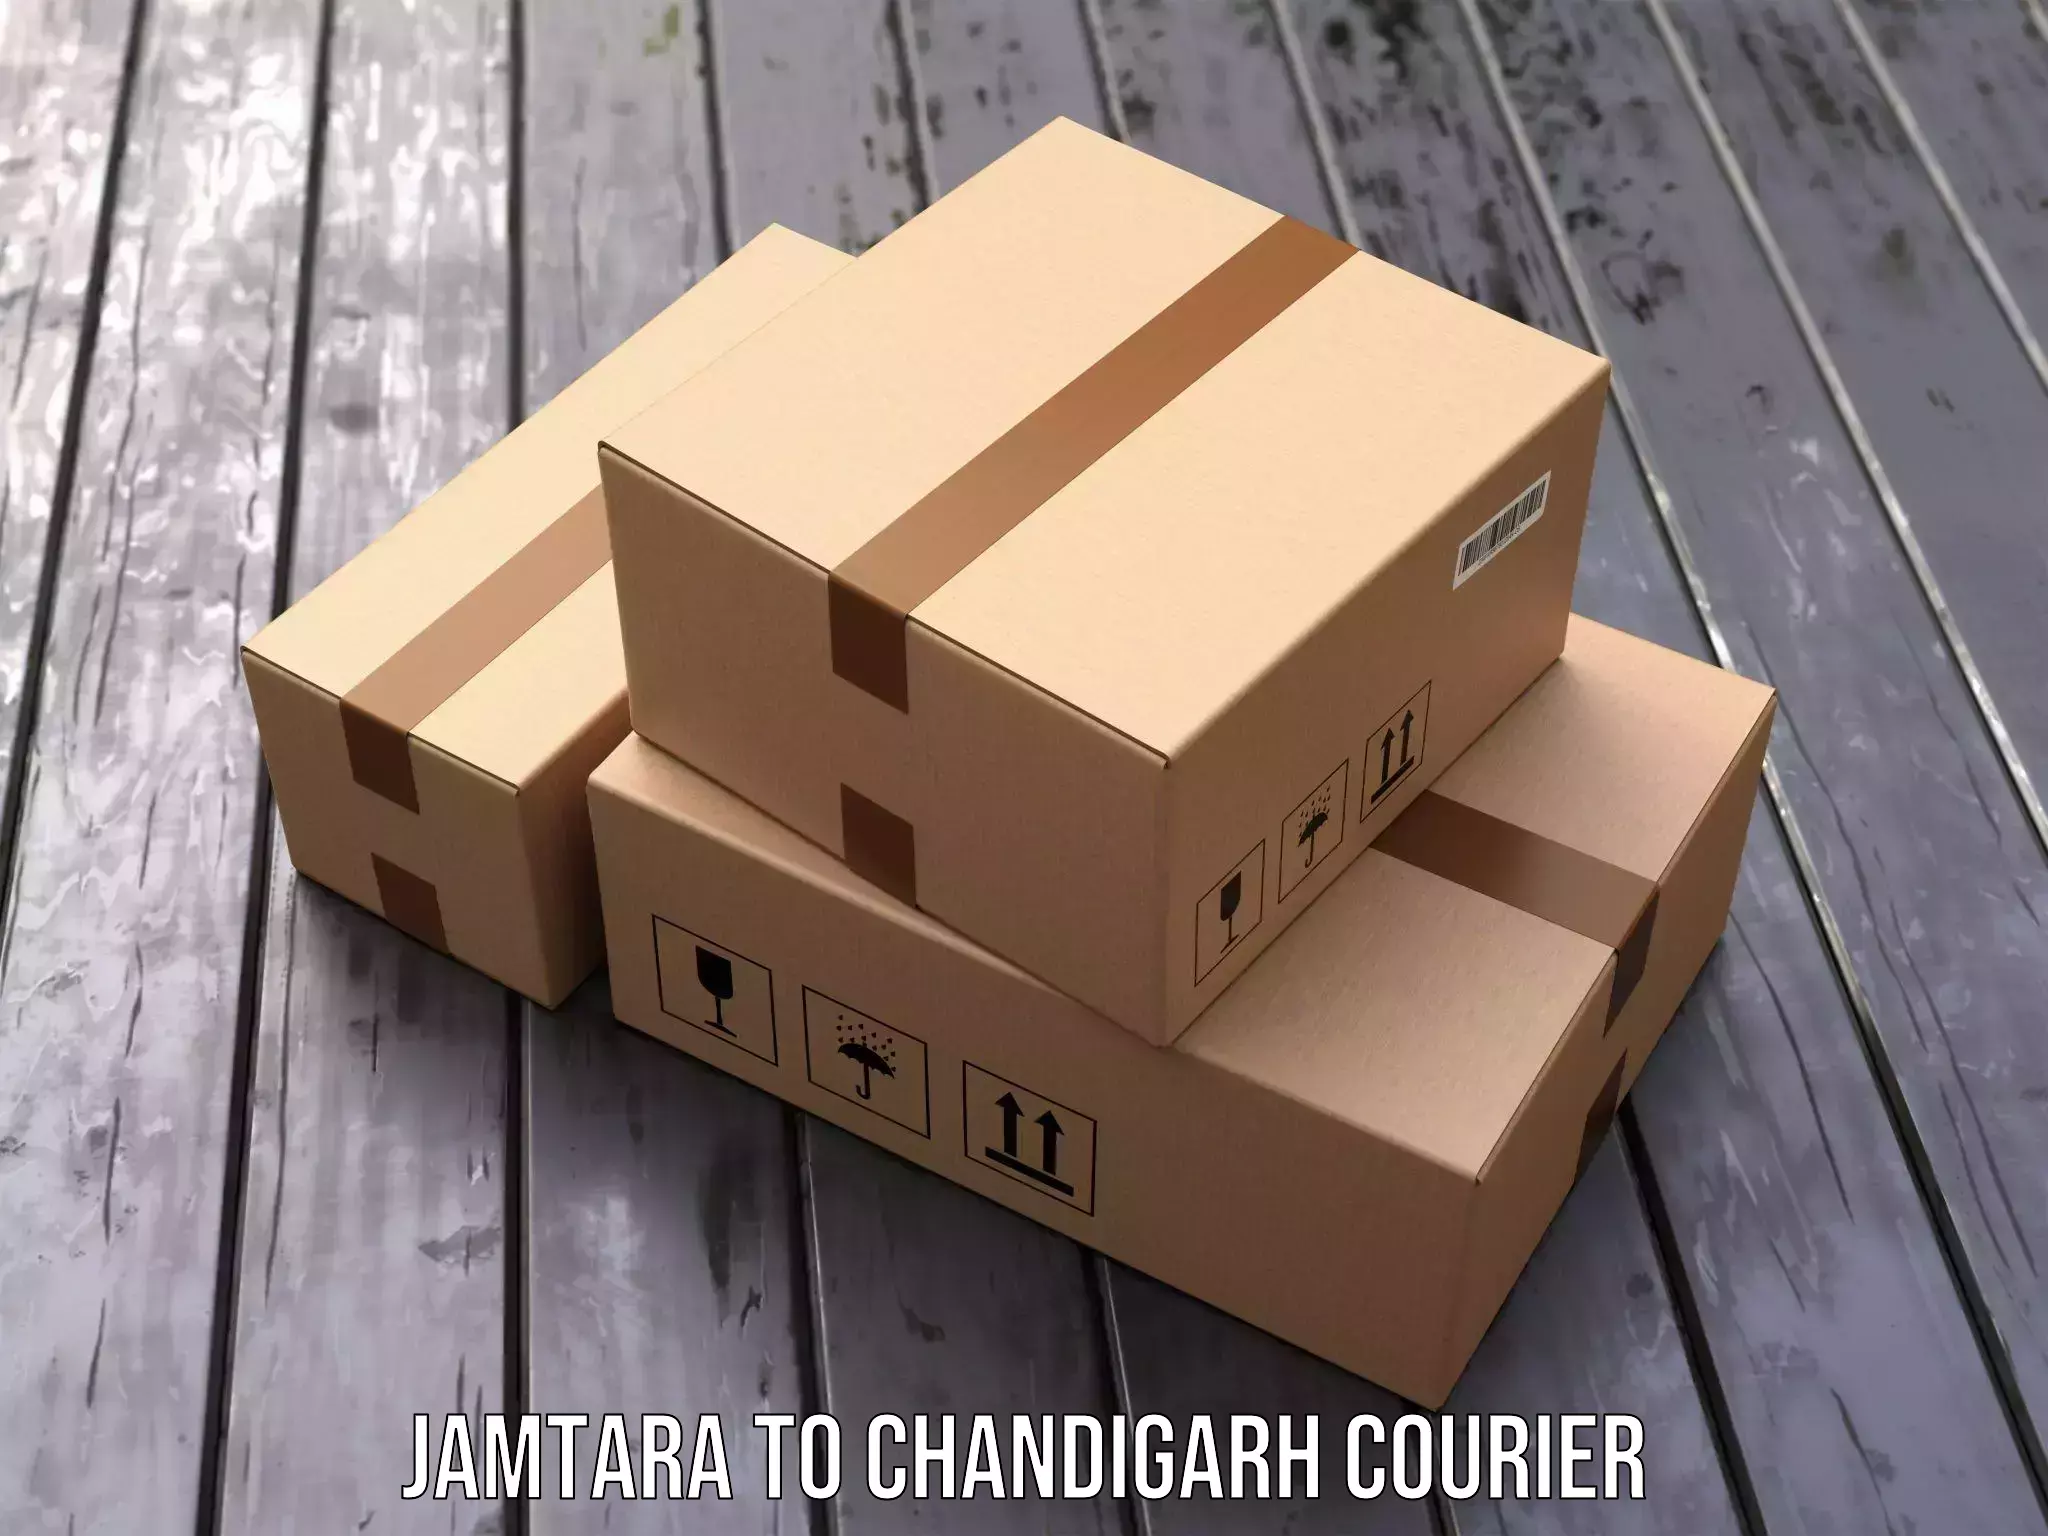 Nationwide delivery network Jamtara to Chandigarh